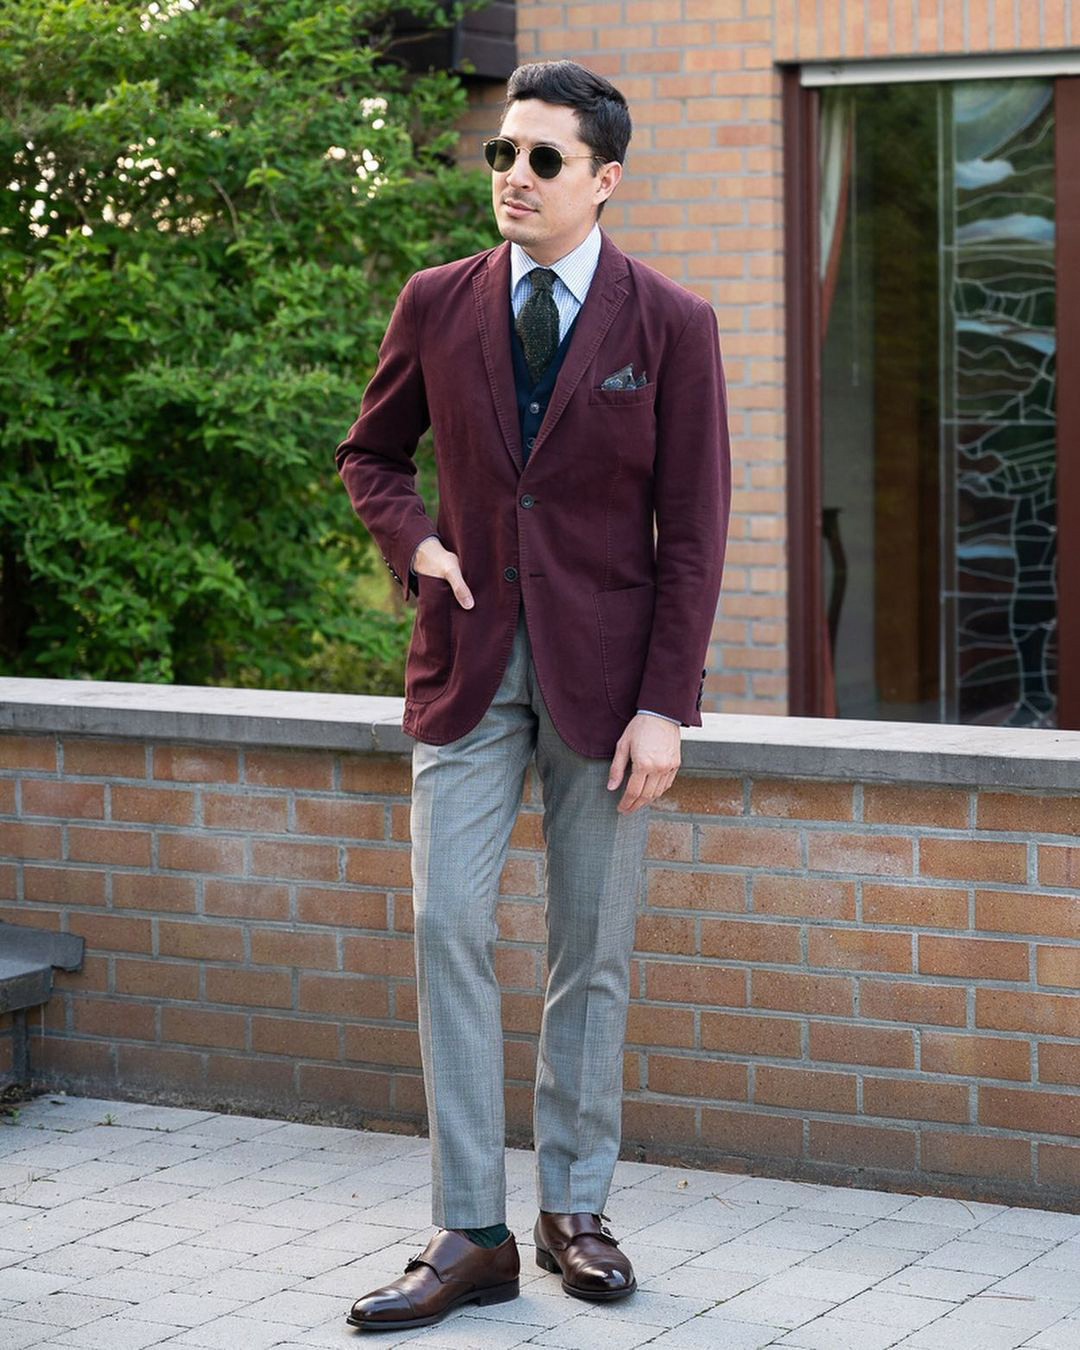 Burgundy corduroy blazer, blue checked shirt, light grey trousers, and brown monk strap shoes